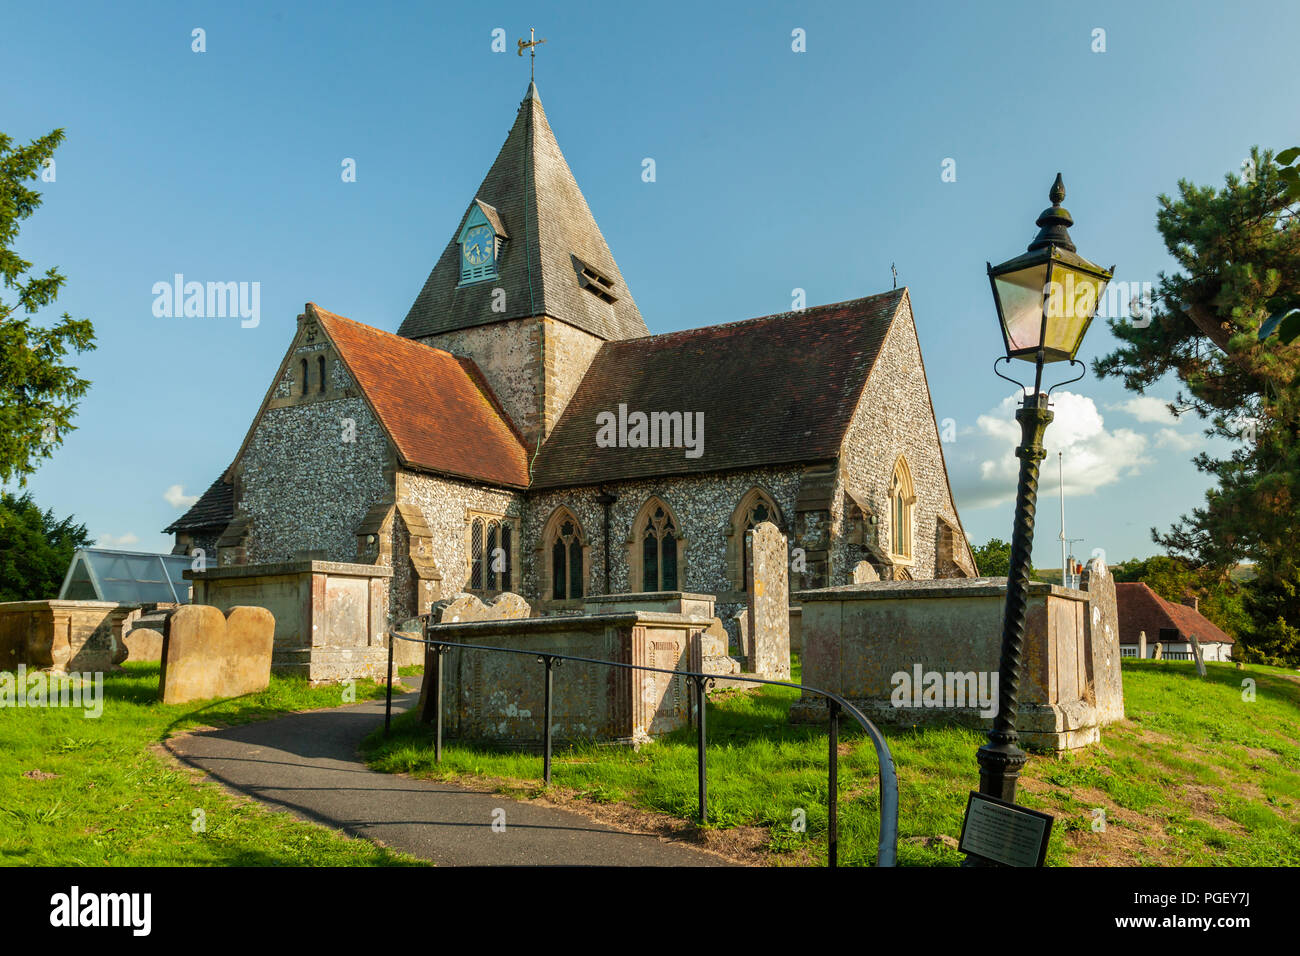 Summer afternoon at St Margaret's church in Ditchling, East Sussex, England. Stock Photo